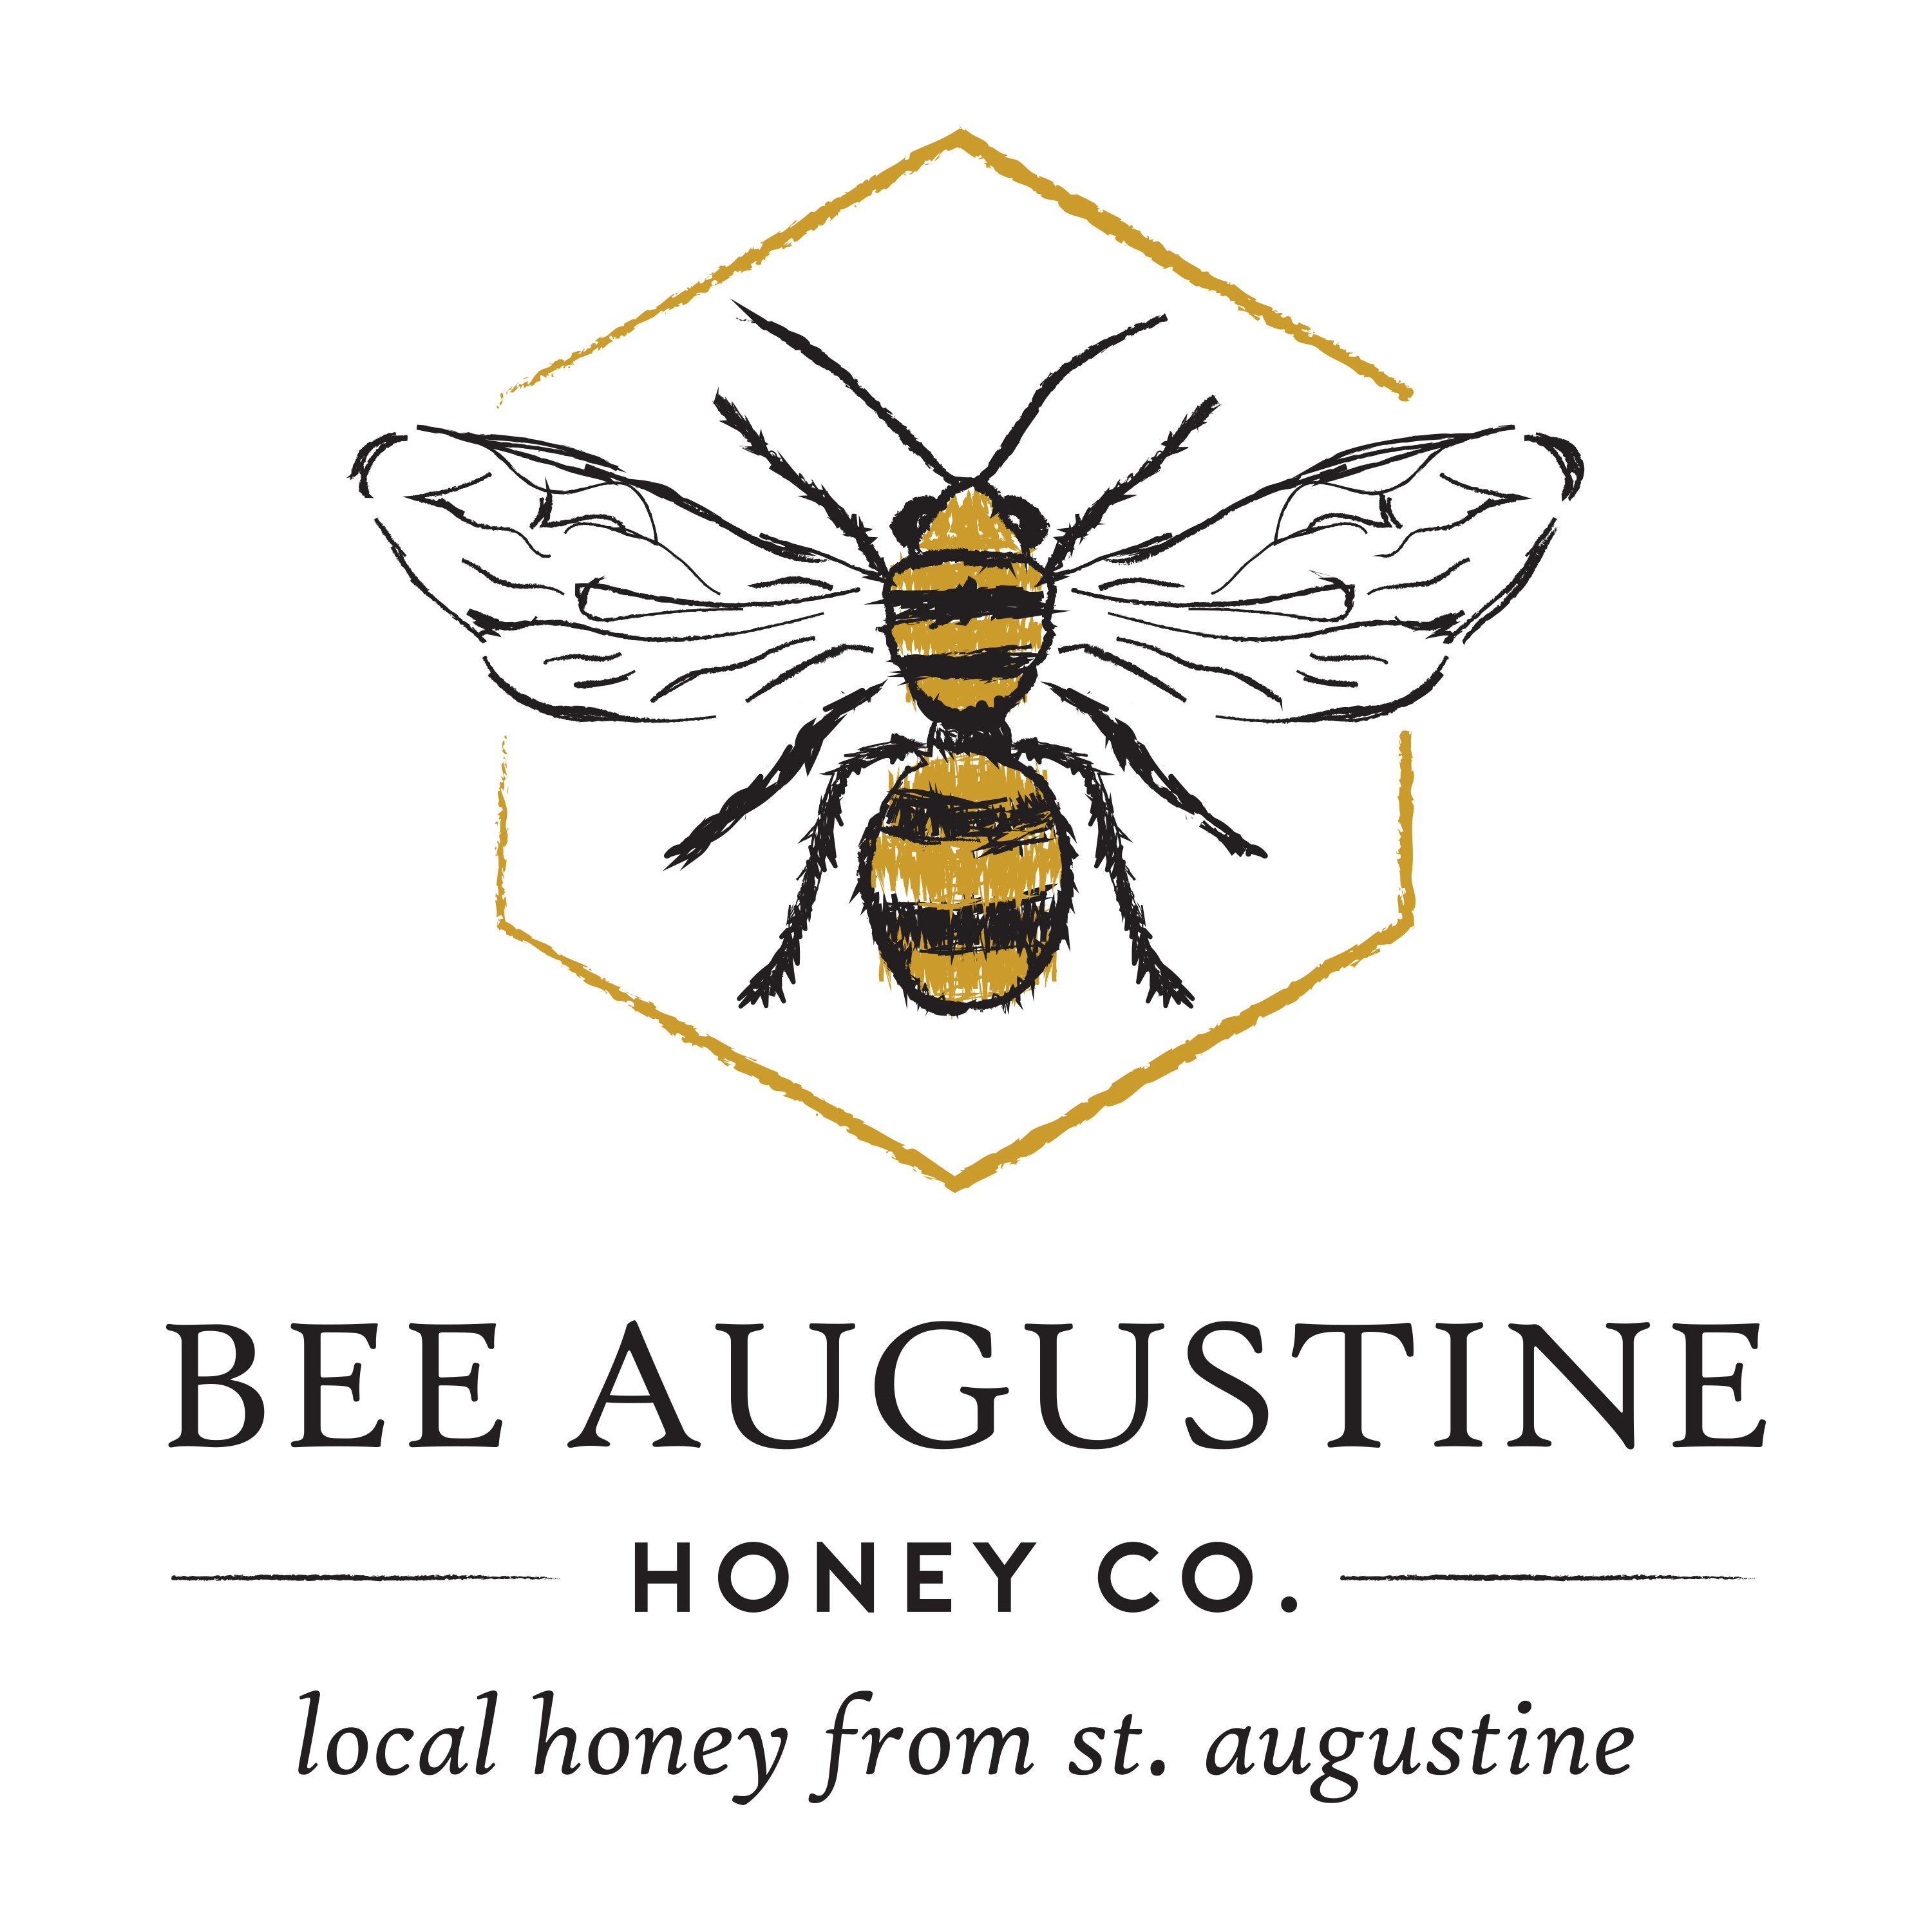 Local Honey From St. Augustine